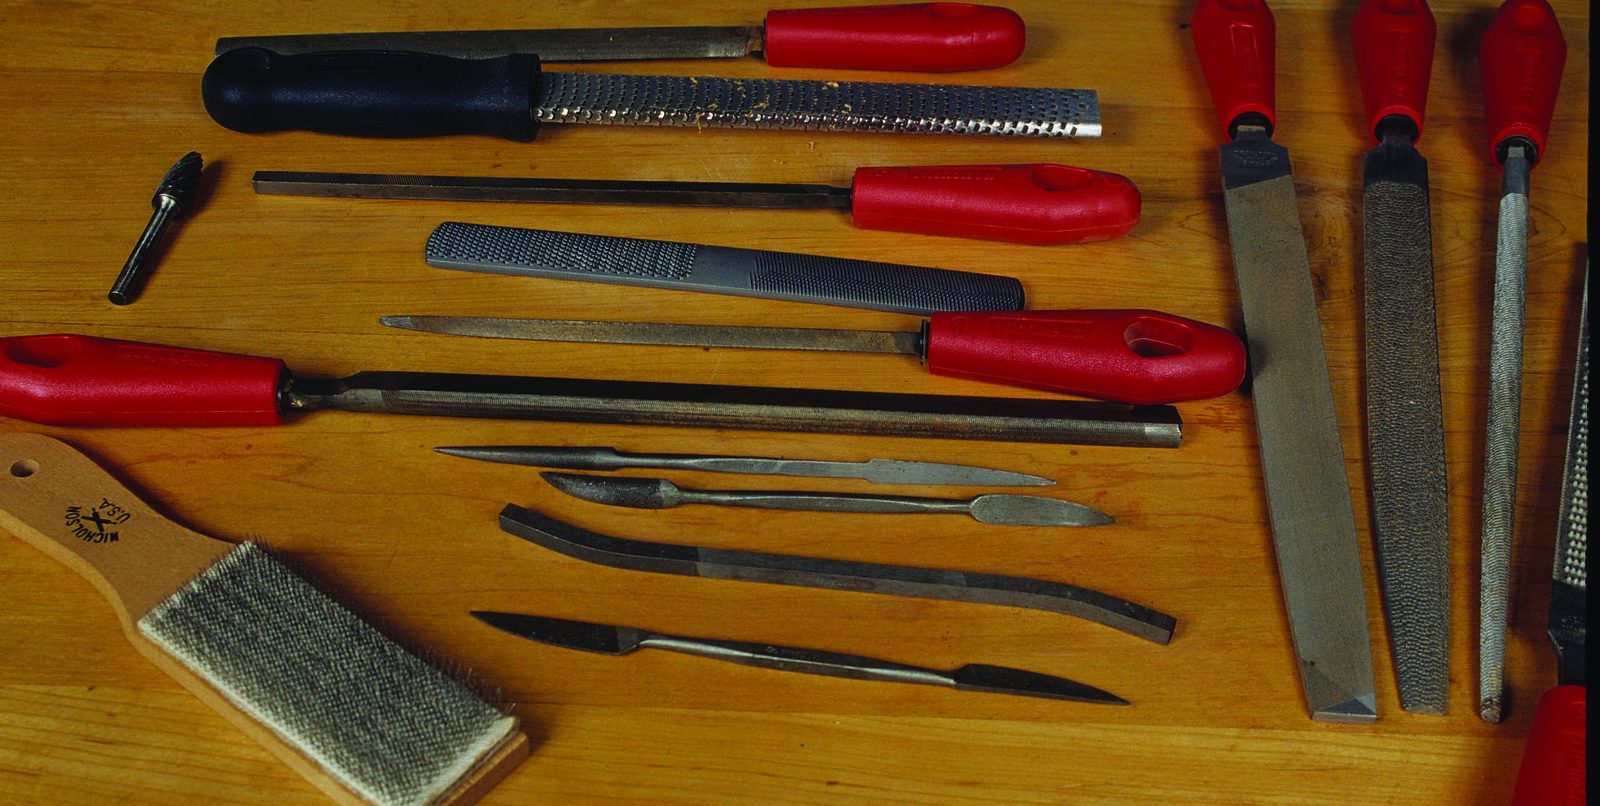 different types of files tools